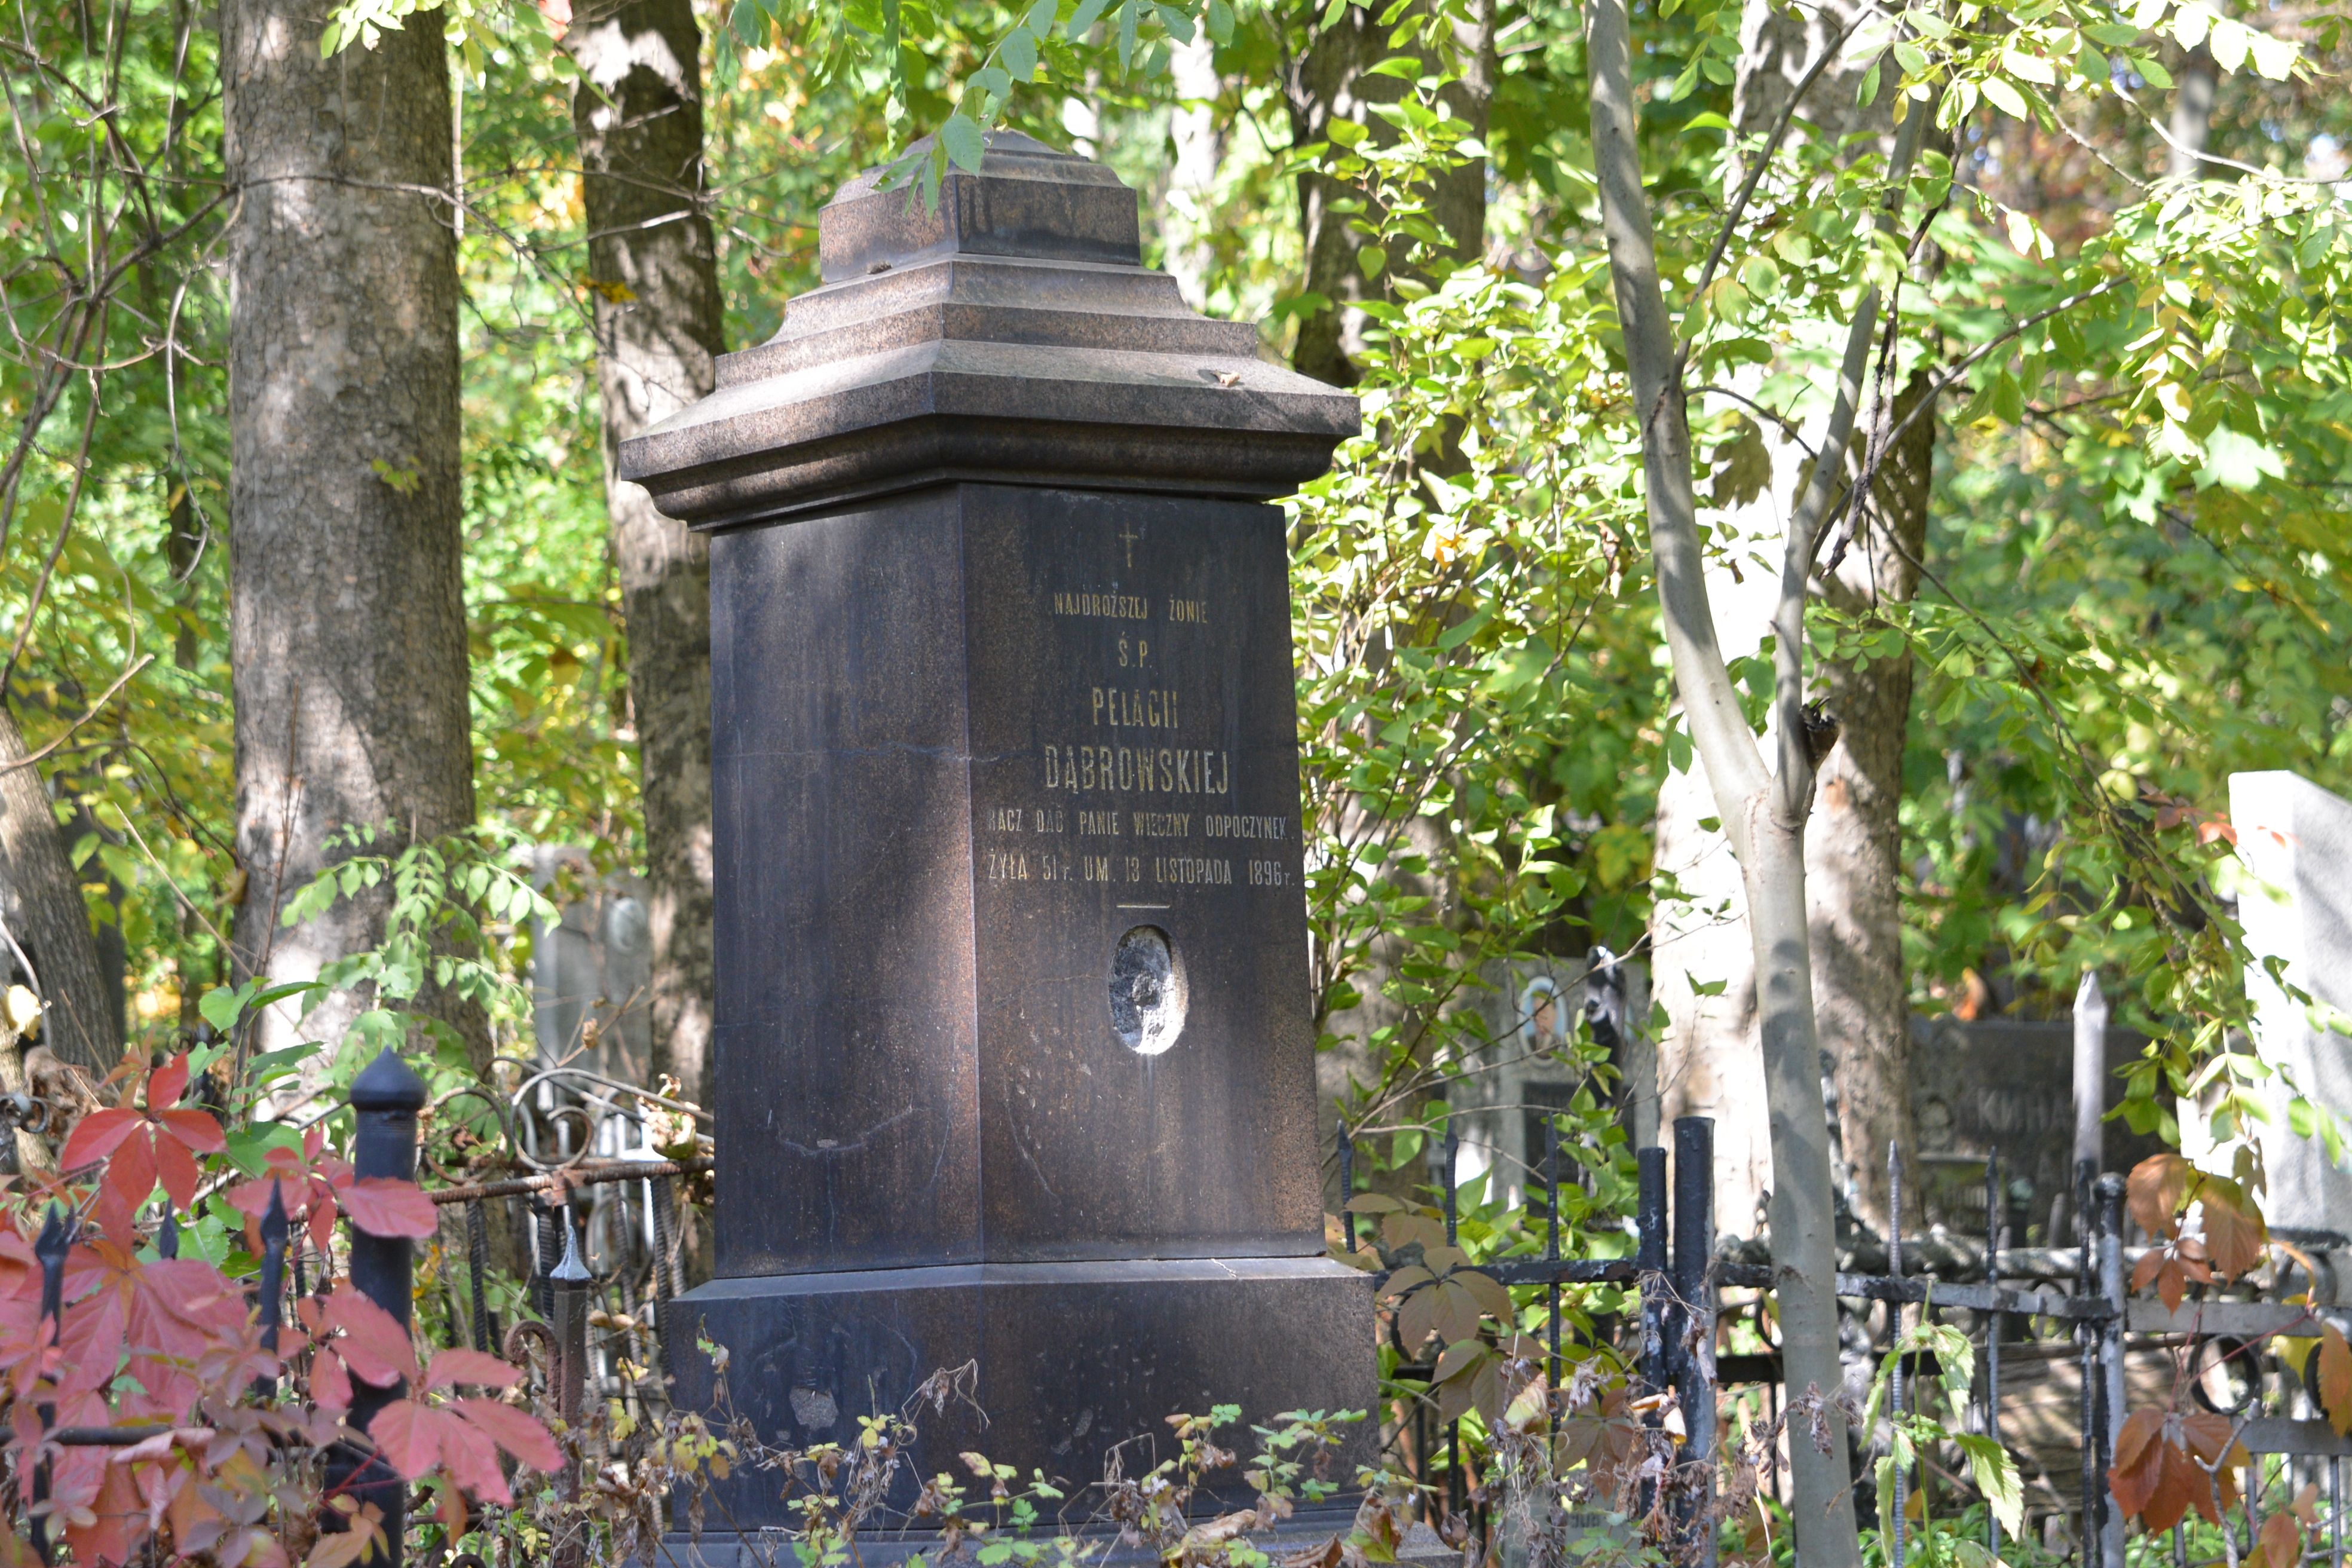 Side view of the gravestone in the form of a high plinth. From the front of the monument the inscription is visible and the space after the photograph. The whole framed by a metal fence, with trees and other gravestone monuments in the background